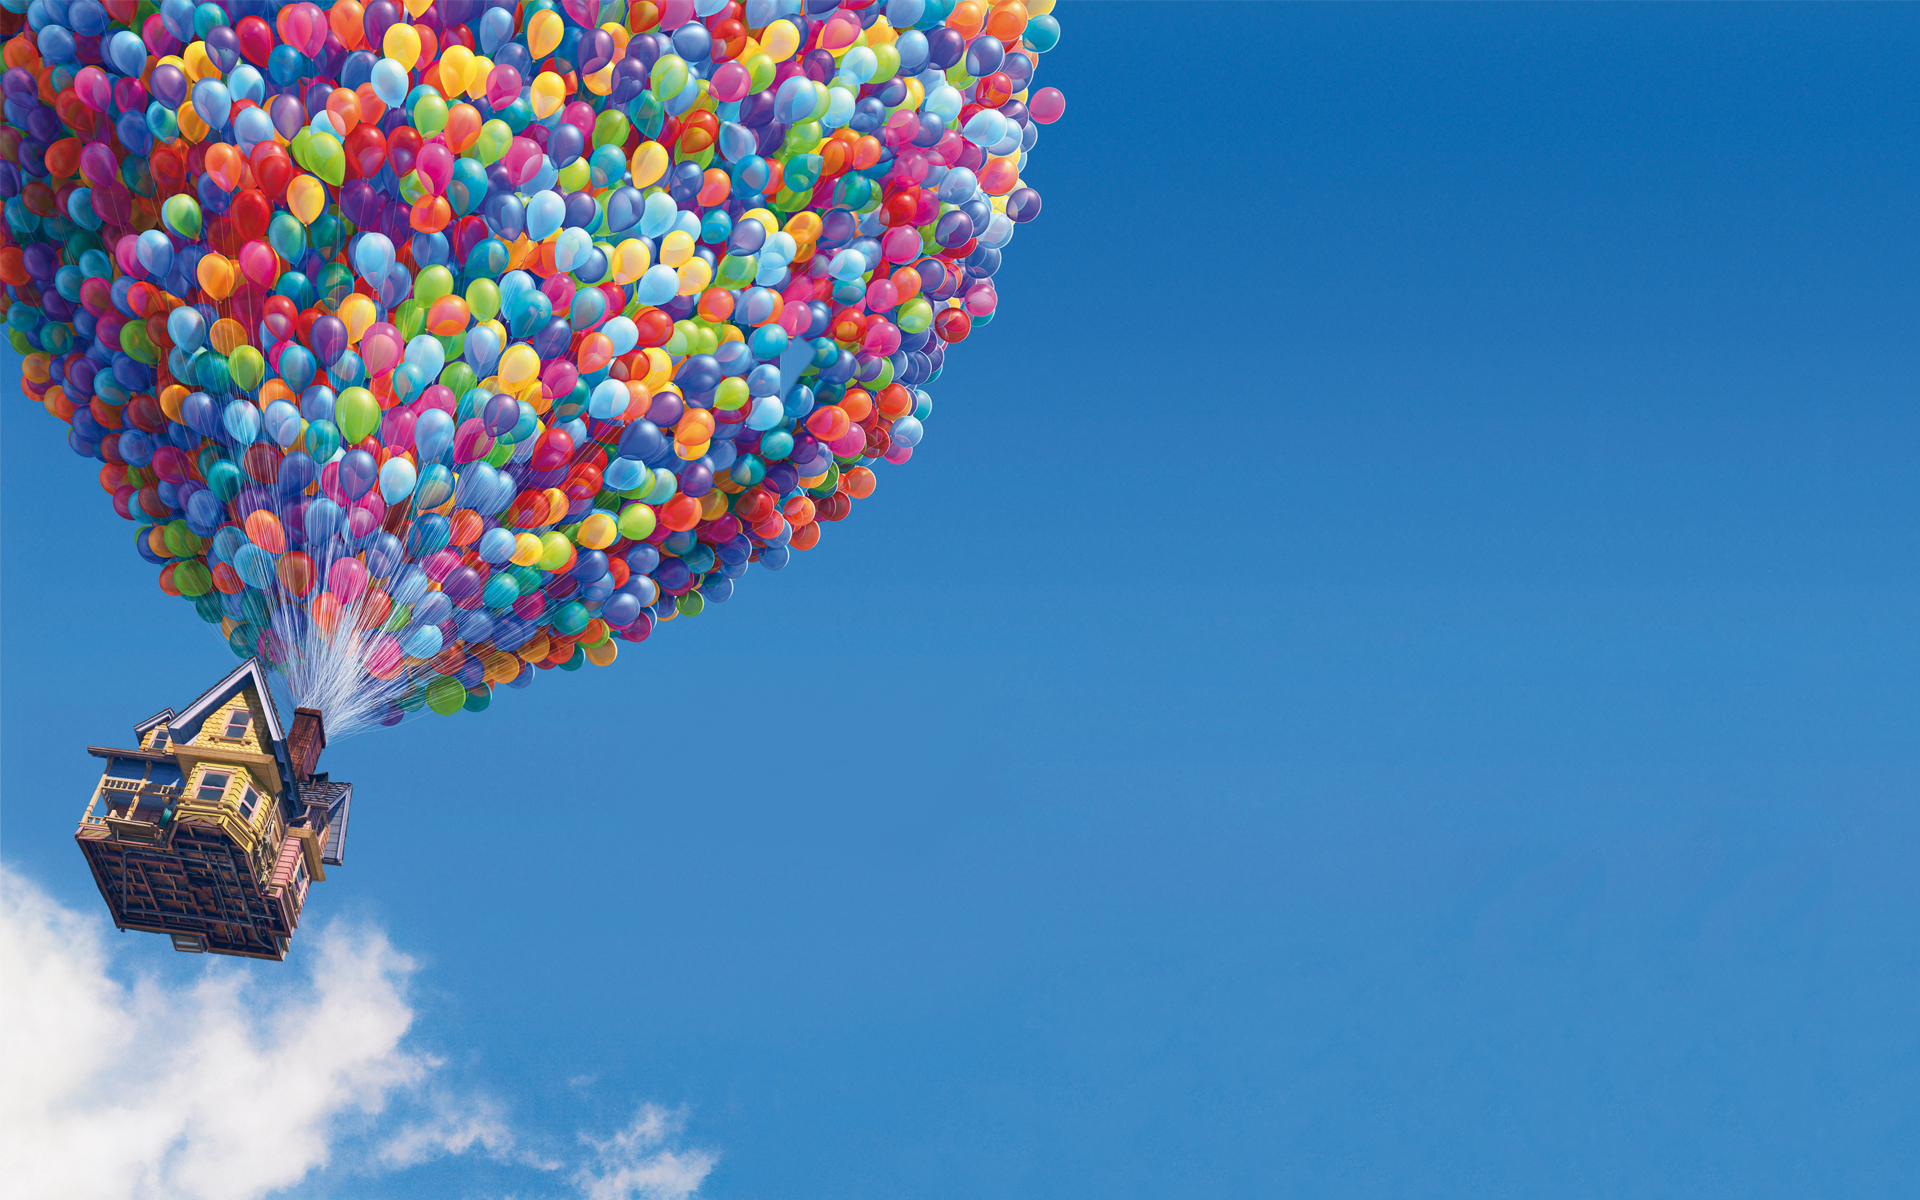 Real Balloons Floating HD Wallpaper, Background Images